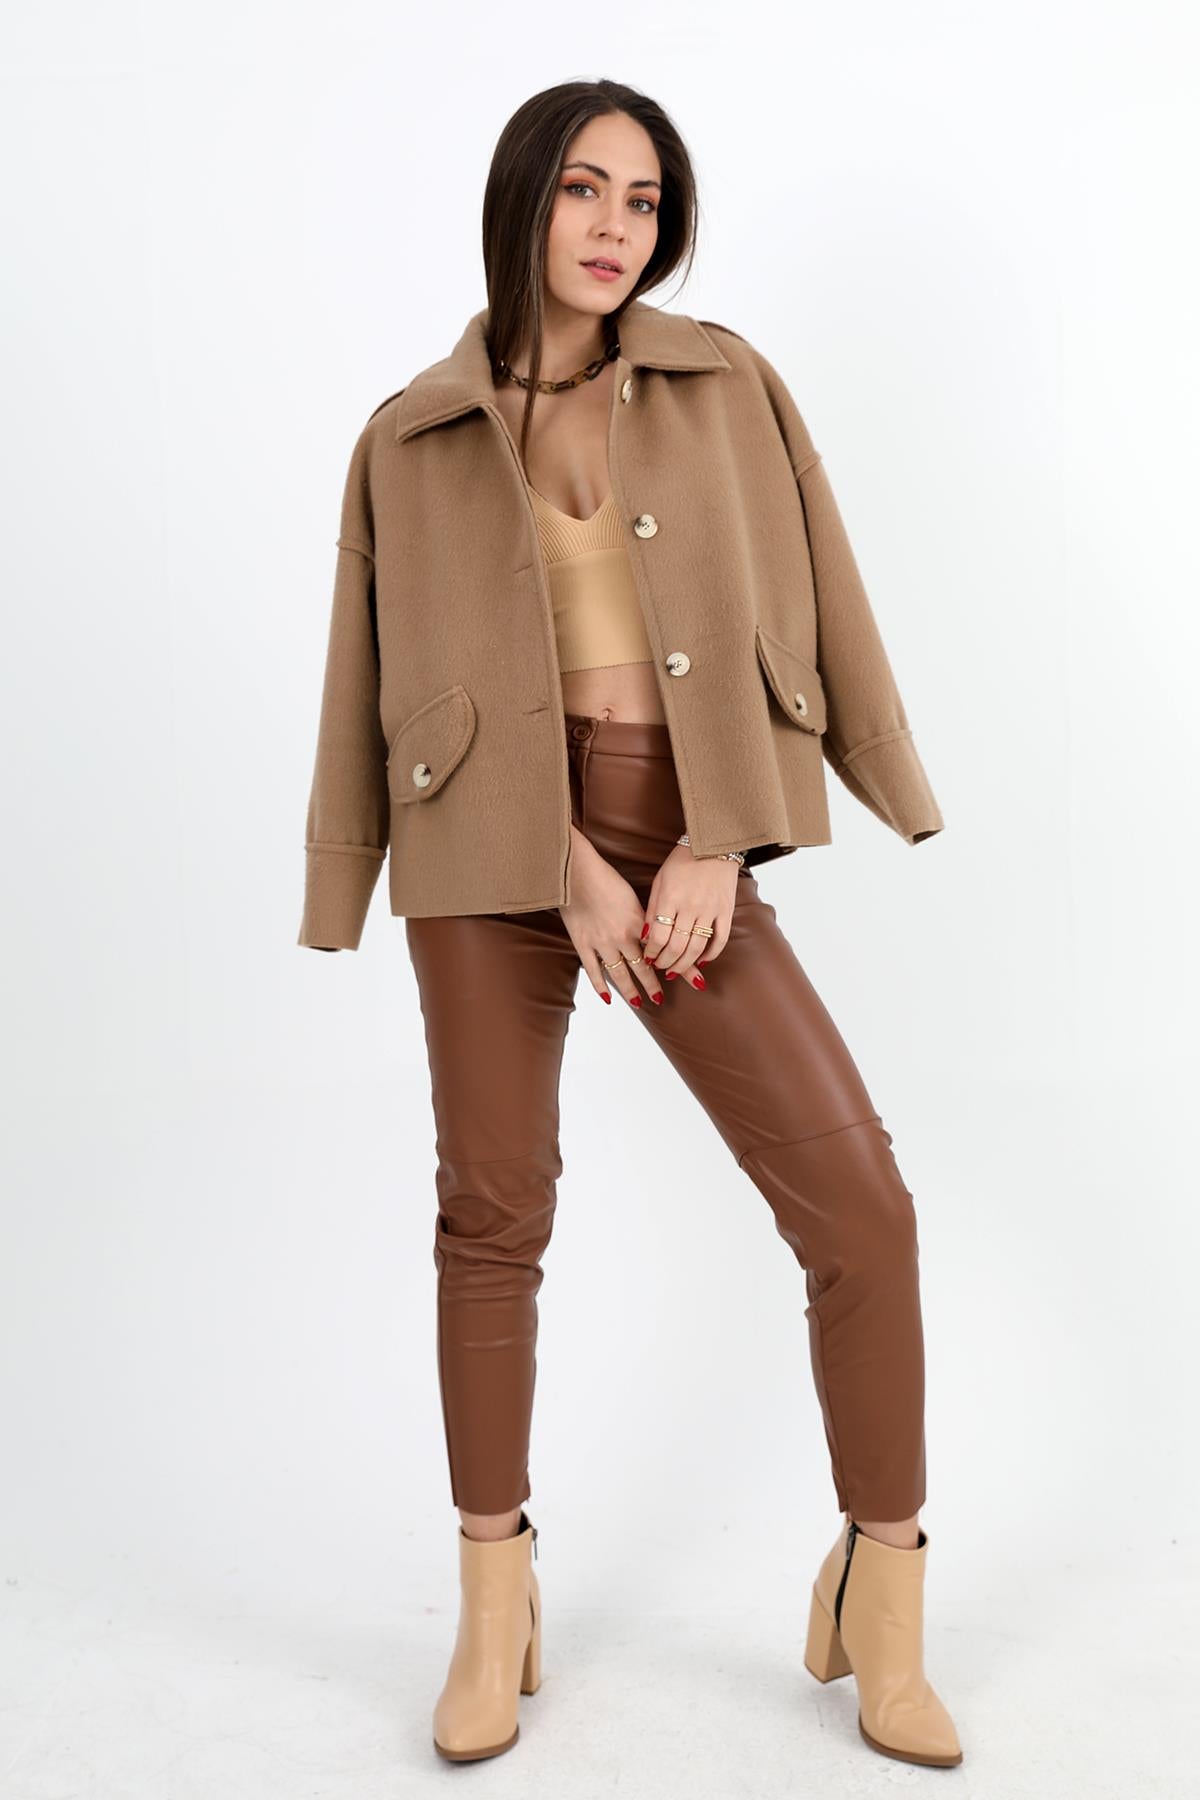 Women's Coat with Pocket Flap Button-Up Short - Camel - STREETMODE ™